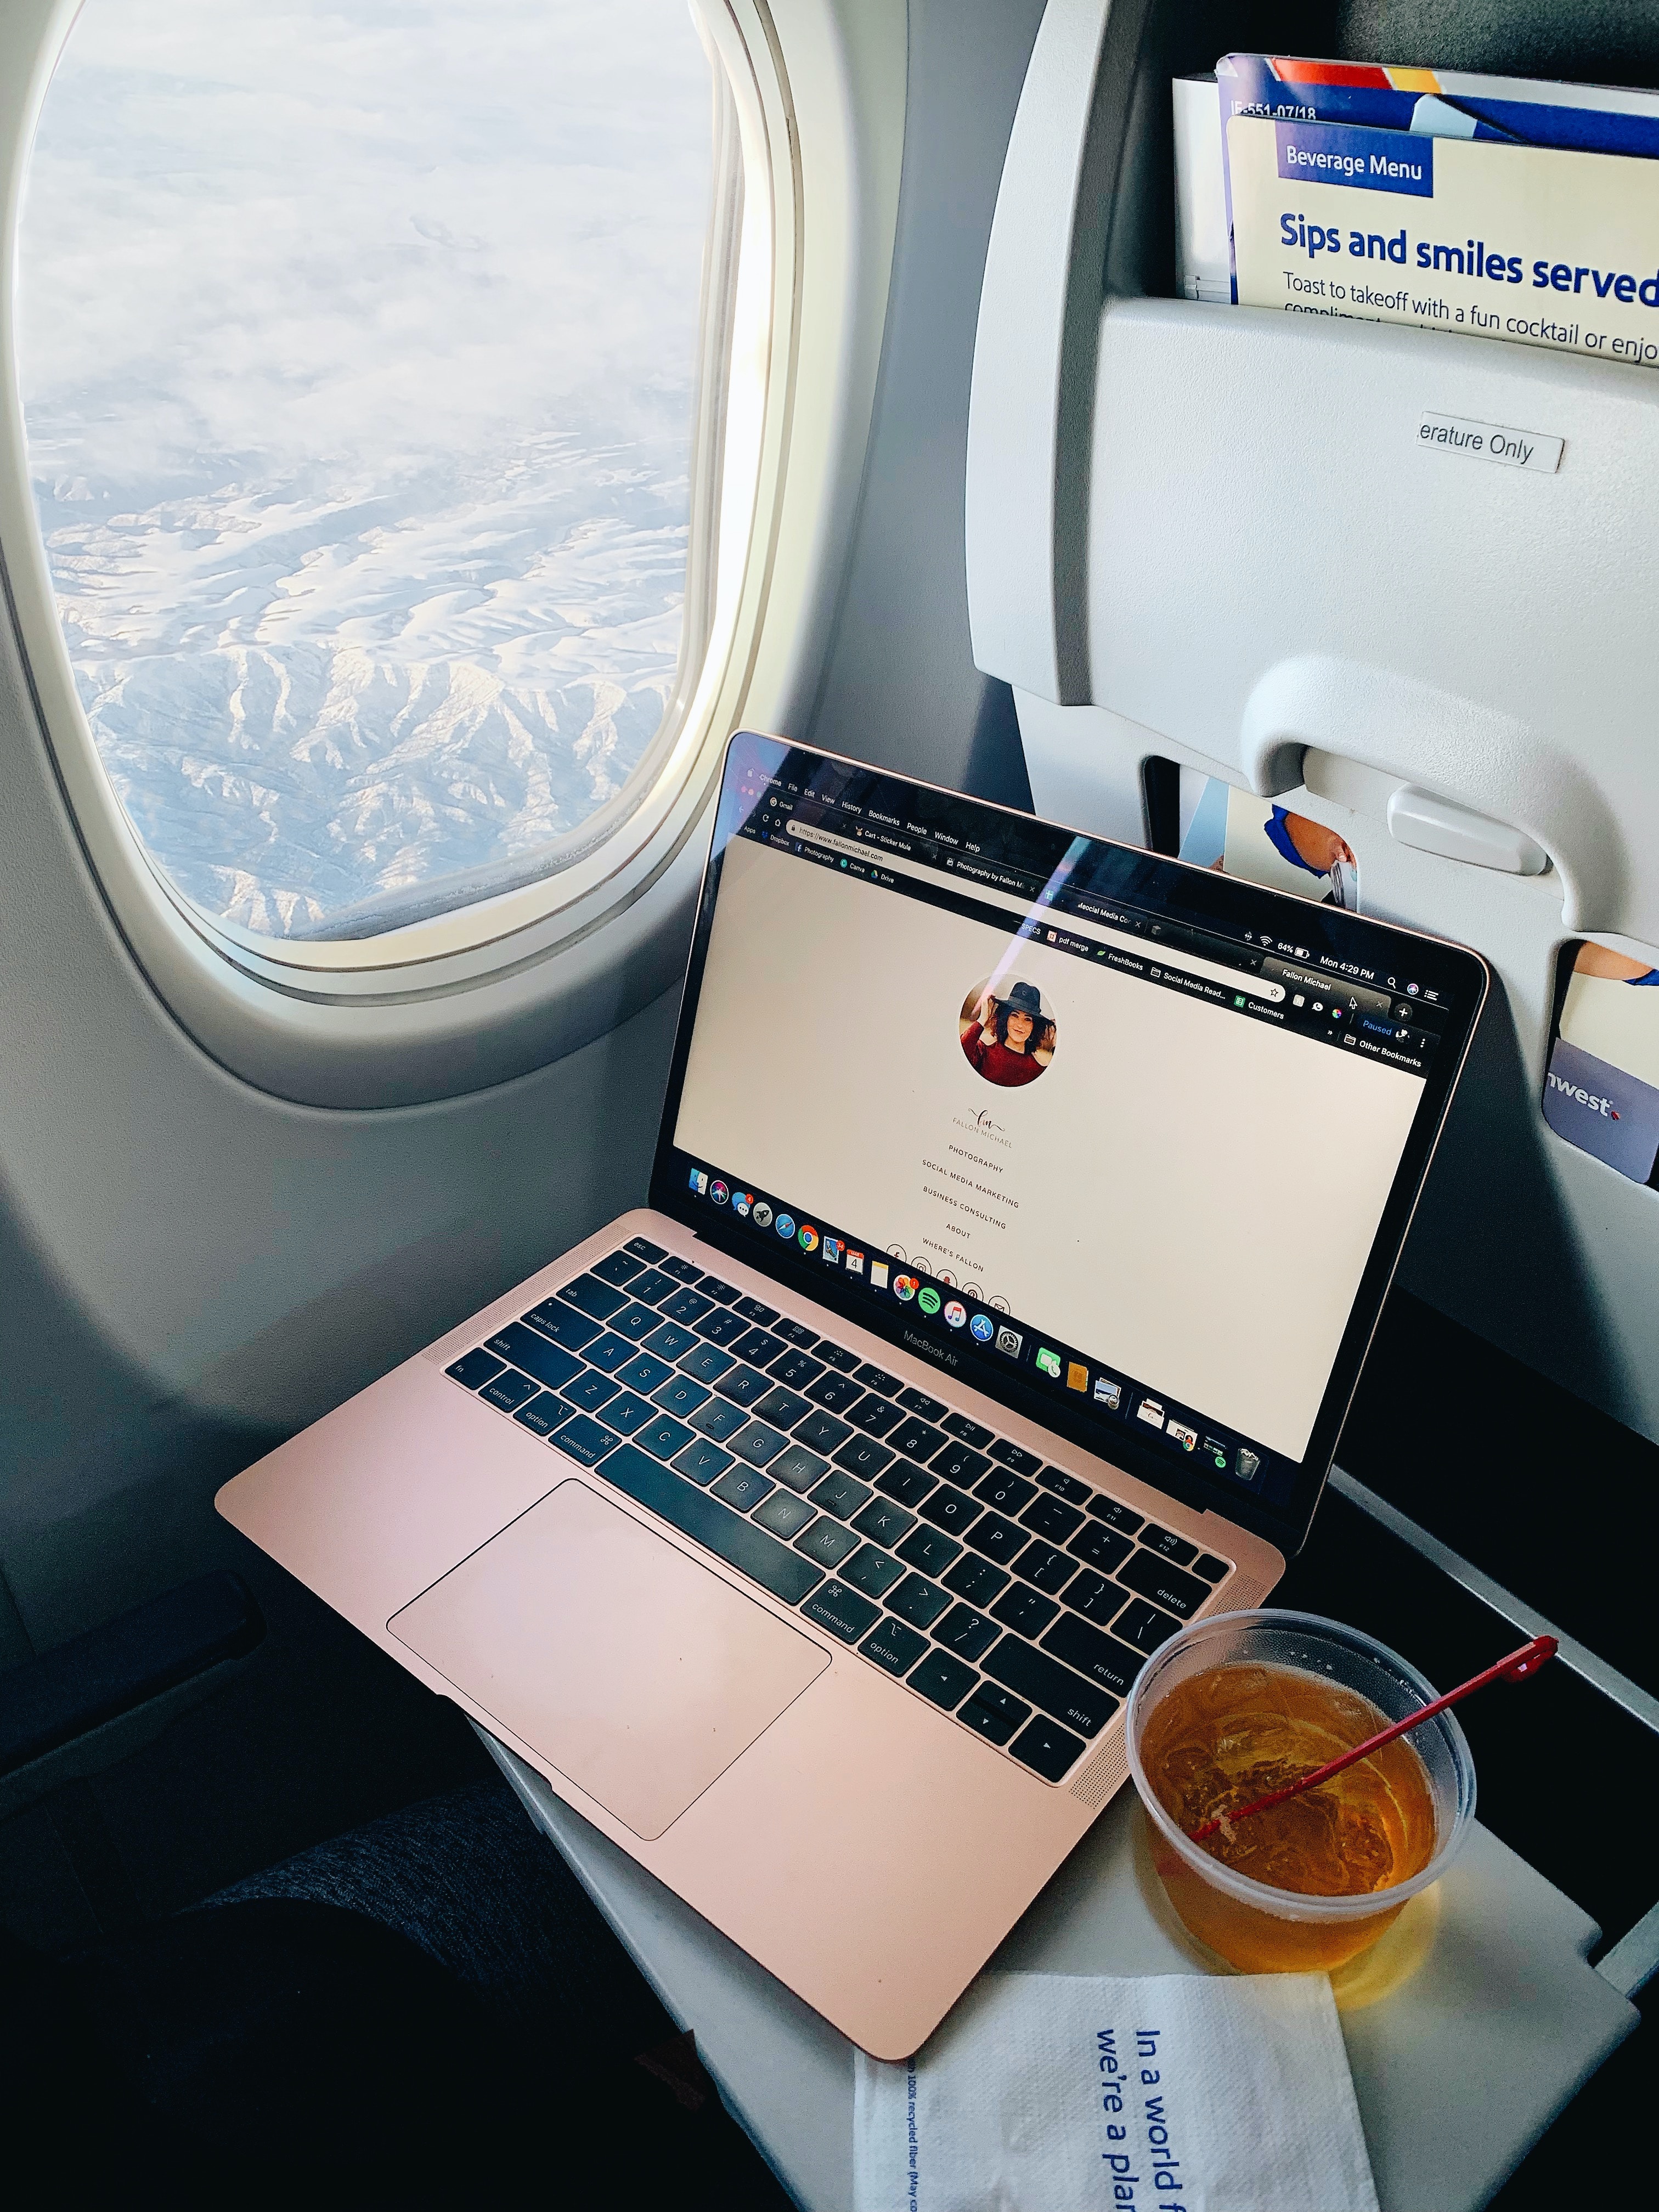 MacBook open on the tray table of an airport seat. There is a drink next to the laptop and the window is opened with a view of mountain peaks. 